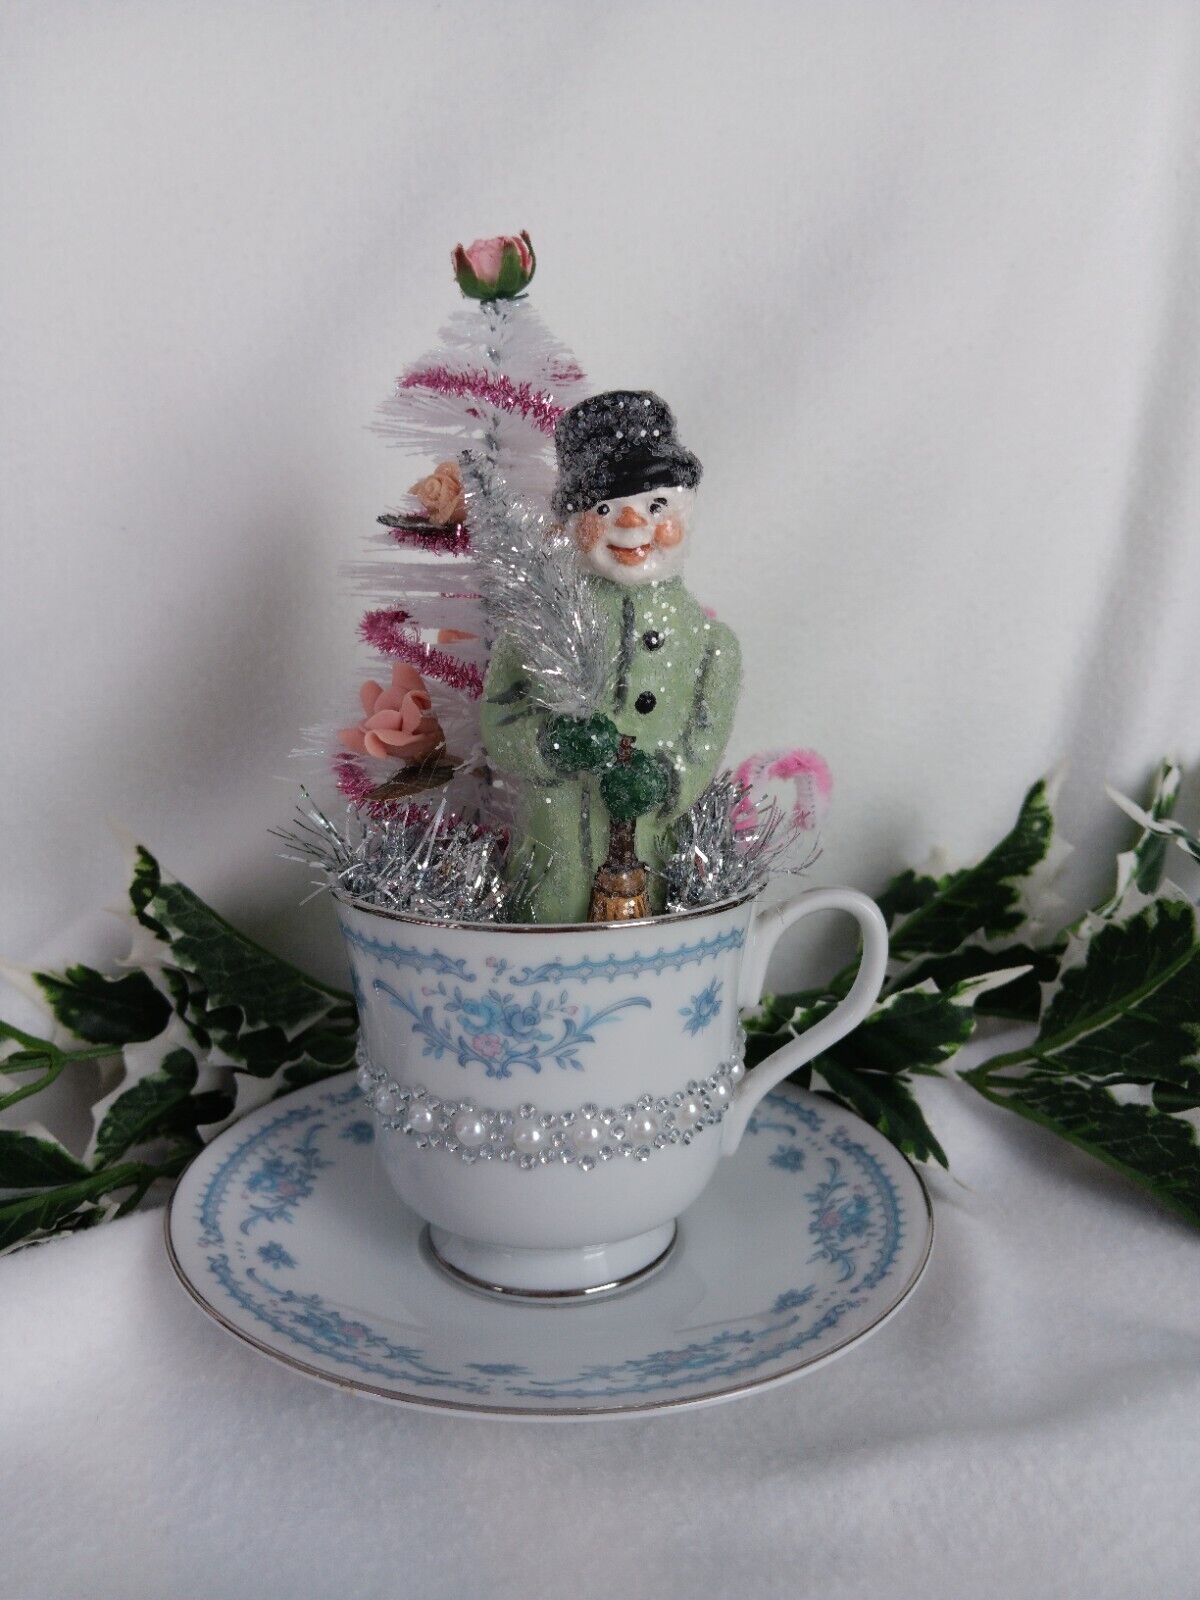 Vintage Chalkware Snowman, Rose Assemblage In Fine China Teacup, 8 1/2\